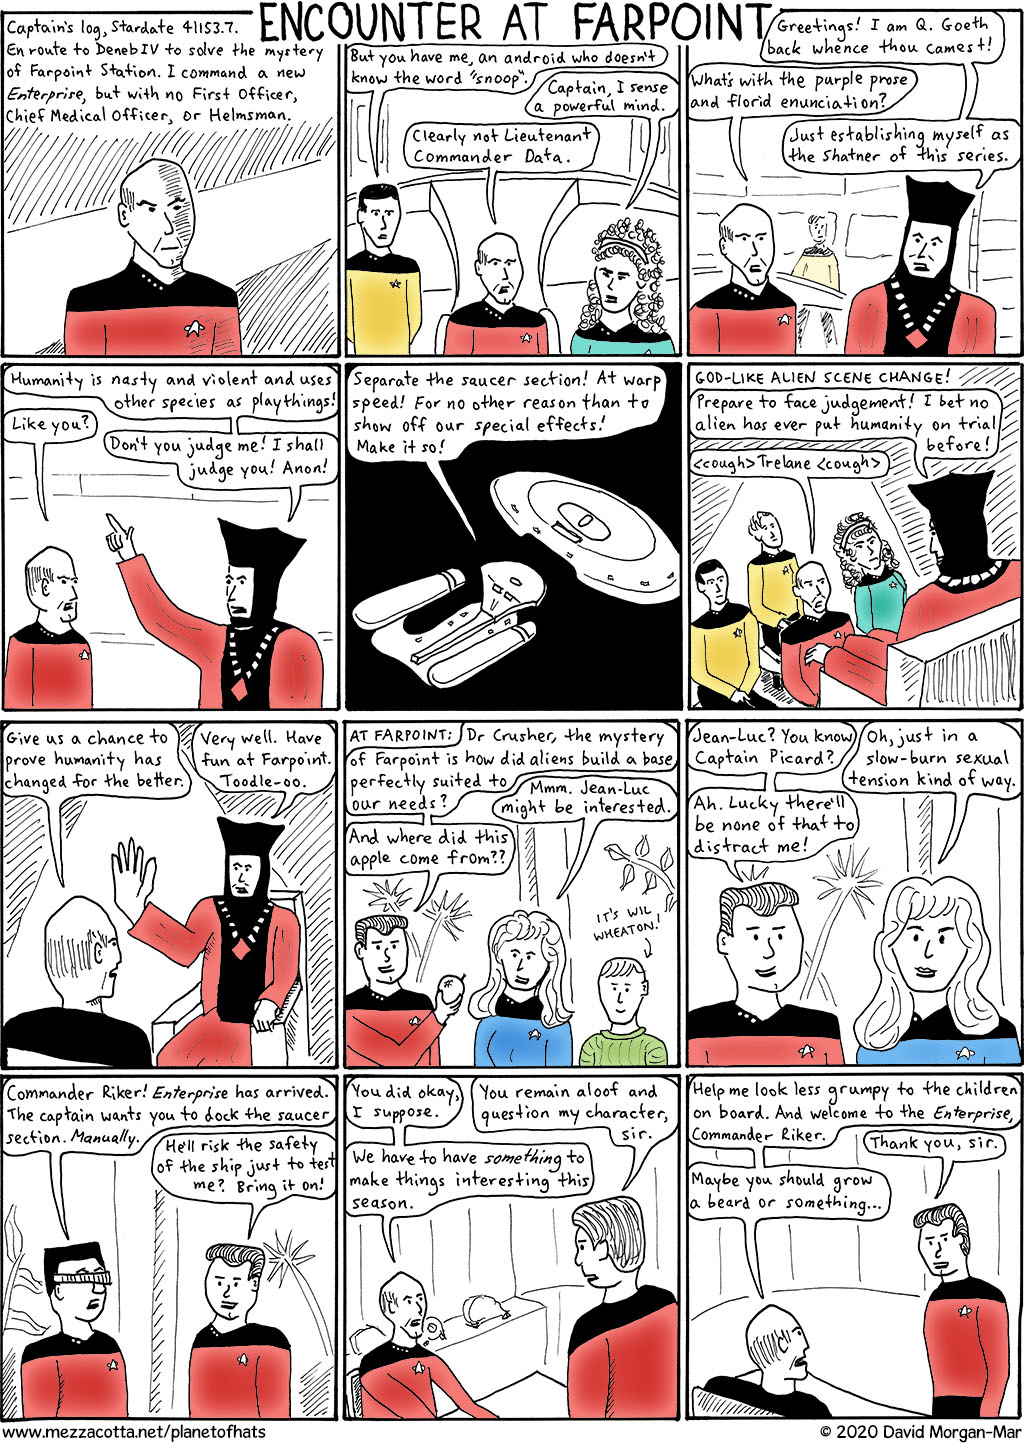 Episode TNG 1.1: Encounter at Farpoint, Part 1